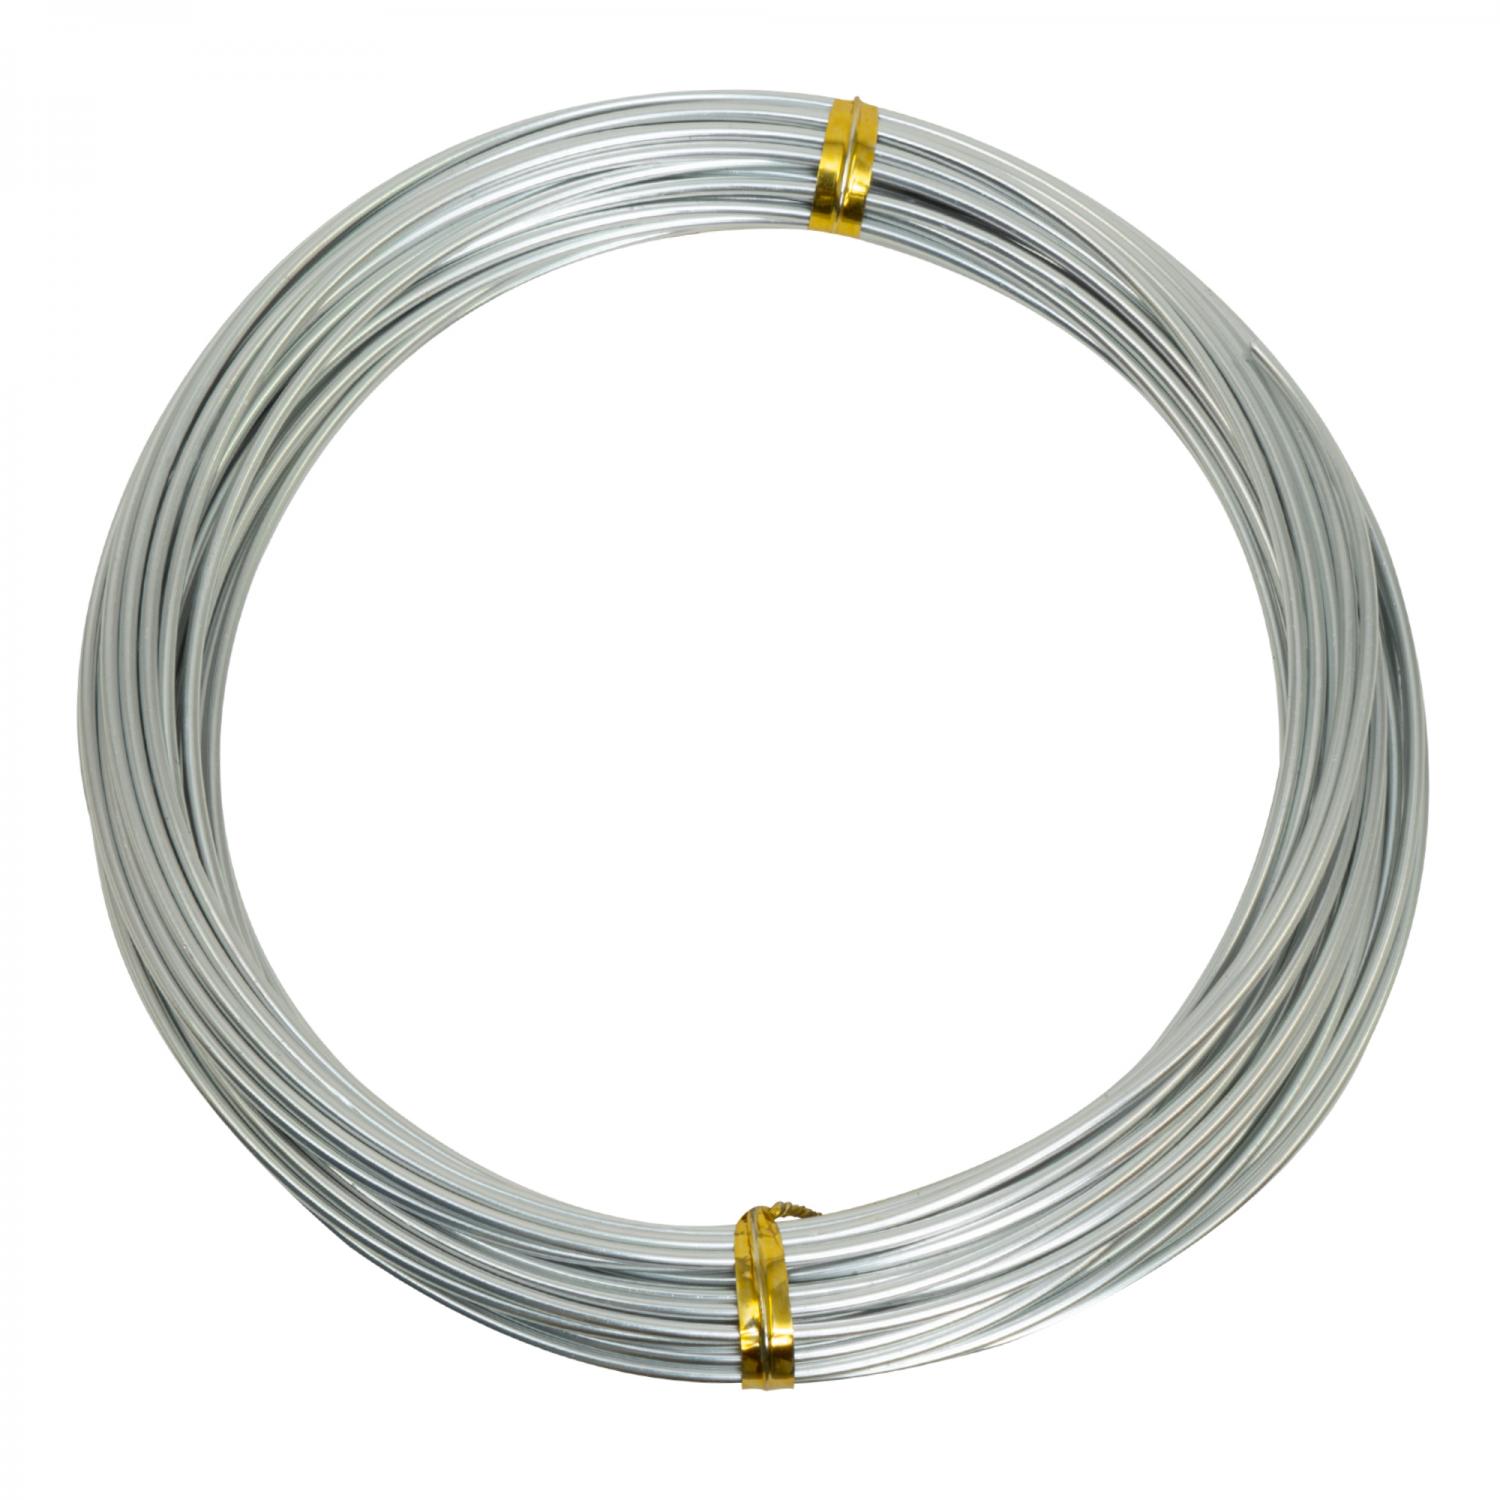 Buy Multi-colored Aluminum Craft Wire, Flexible Metal Wire for